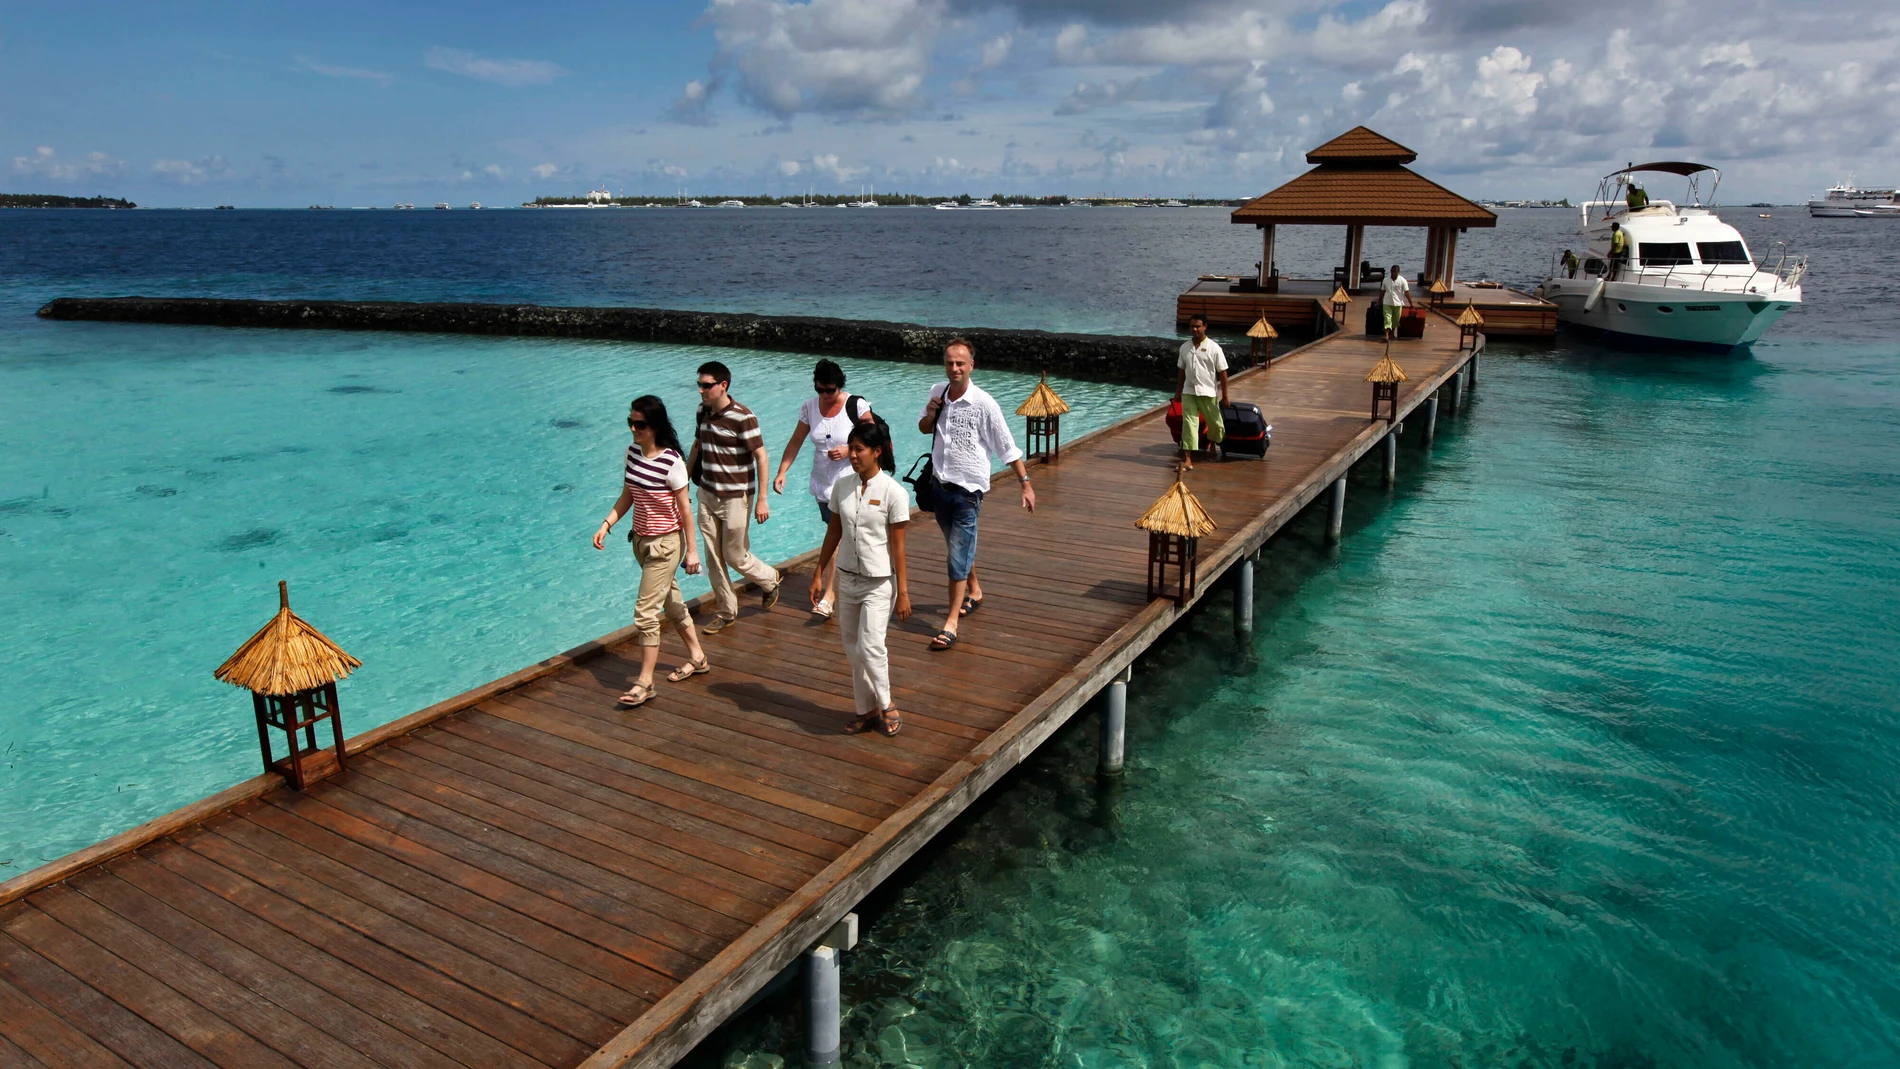 FILE- Foreign tourists arrive in a resort in the Kurumba island in Maldives, Feb. 12, 2012. Relationship between India and the Maldives is facing challenges after officials in the tiny island nation made derogatory remarks against Prime Minister Narendra Modi’s posts that promoted the pristine beaches of India’s Lakshadweep archipelago. (AP Photo/ Gemunu Amarasinghe, File)